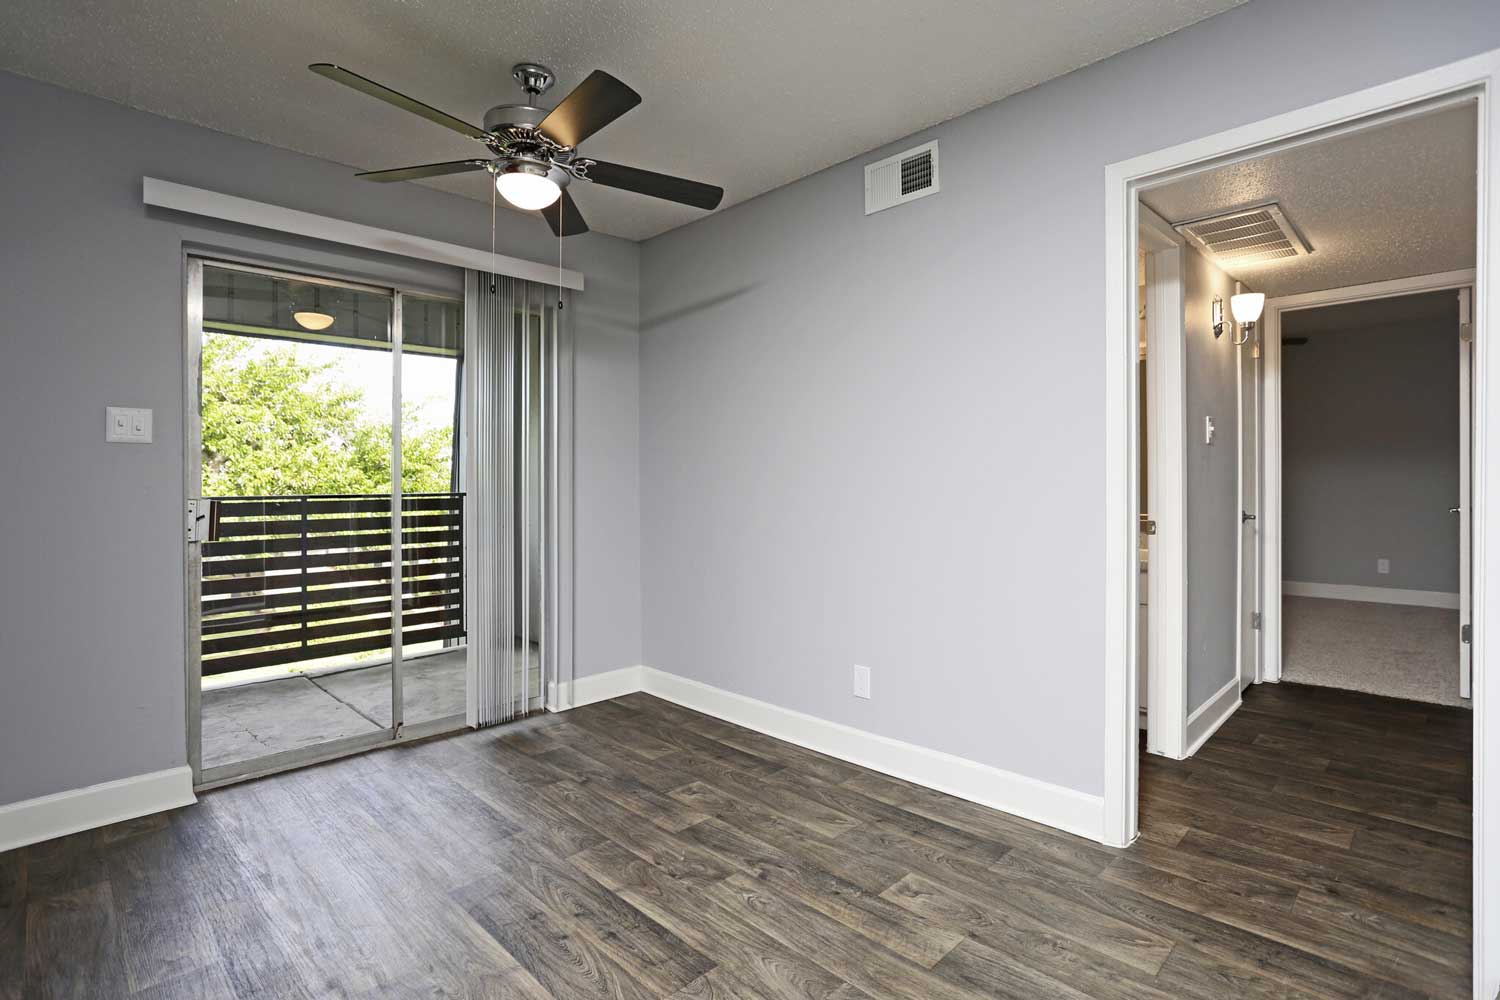 Apartment Interior with Plank Flooring at The Junction Apartments in Arlington, Texas